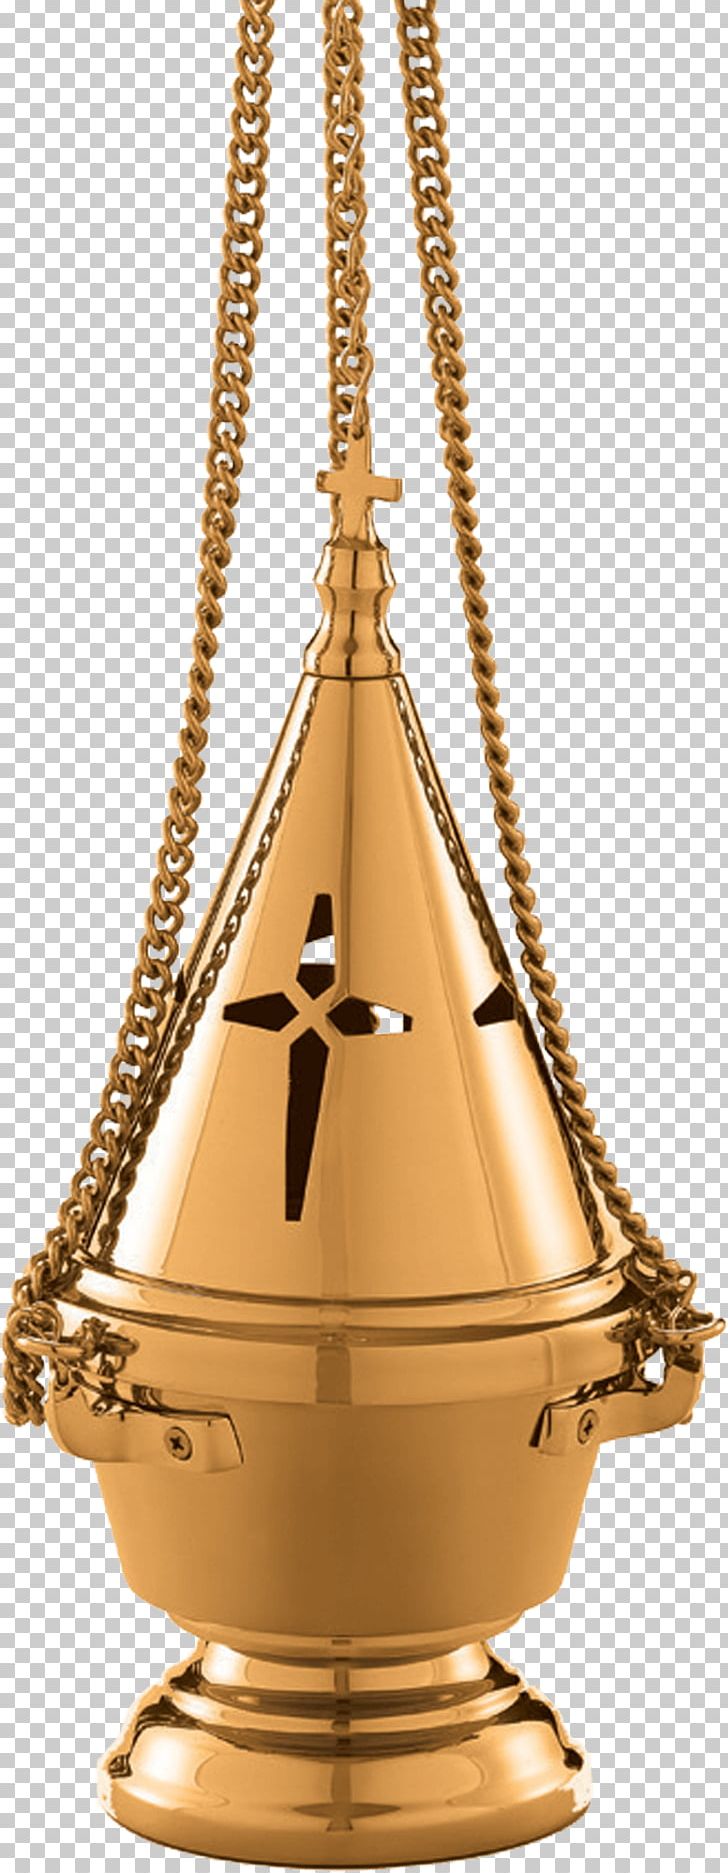 Thurible Censer Brass Loďka Charcoal PNG, Clipart, Baking, Boat, Brass, Bronze, Censer Free PNG Download